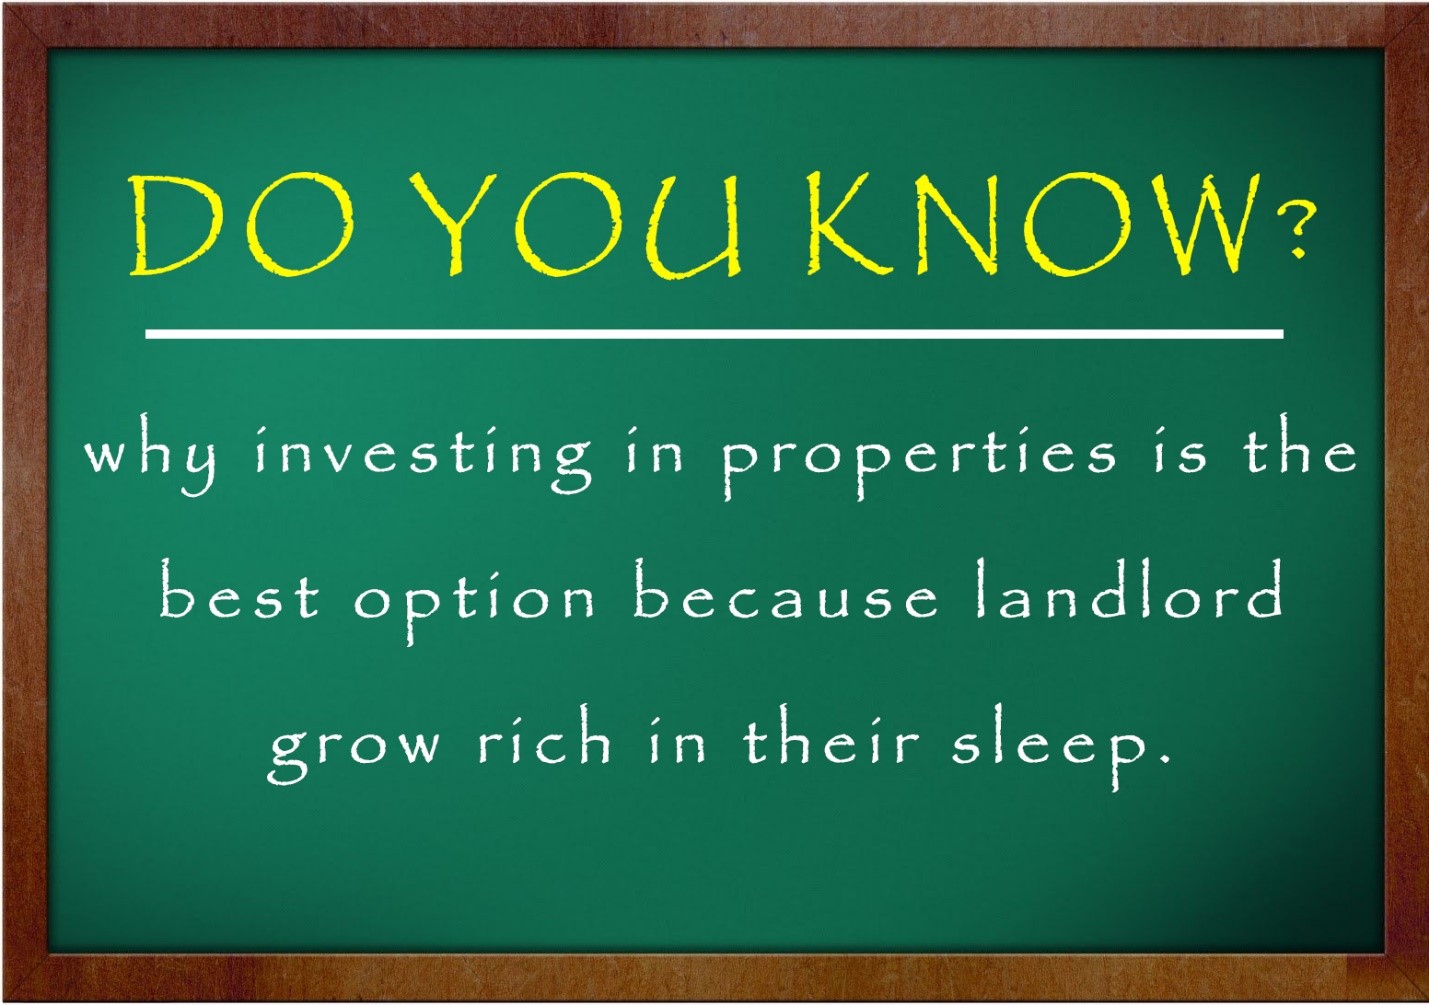 Why Do you invest in properties